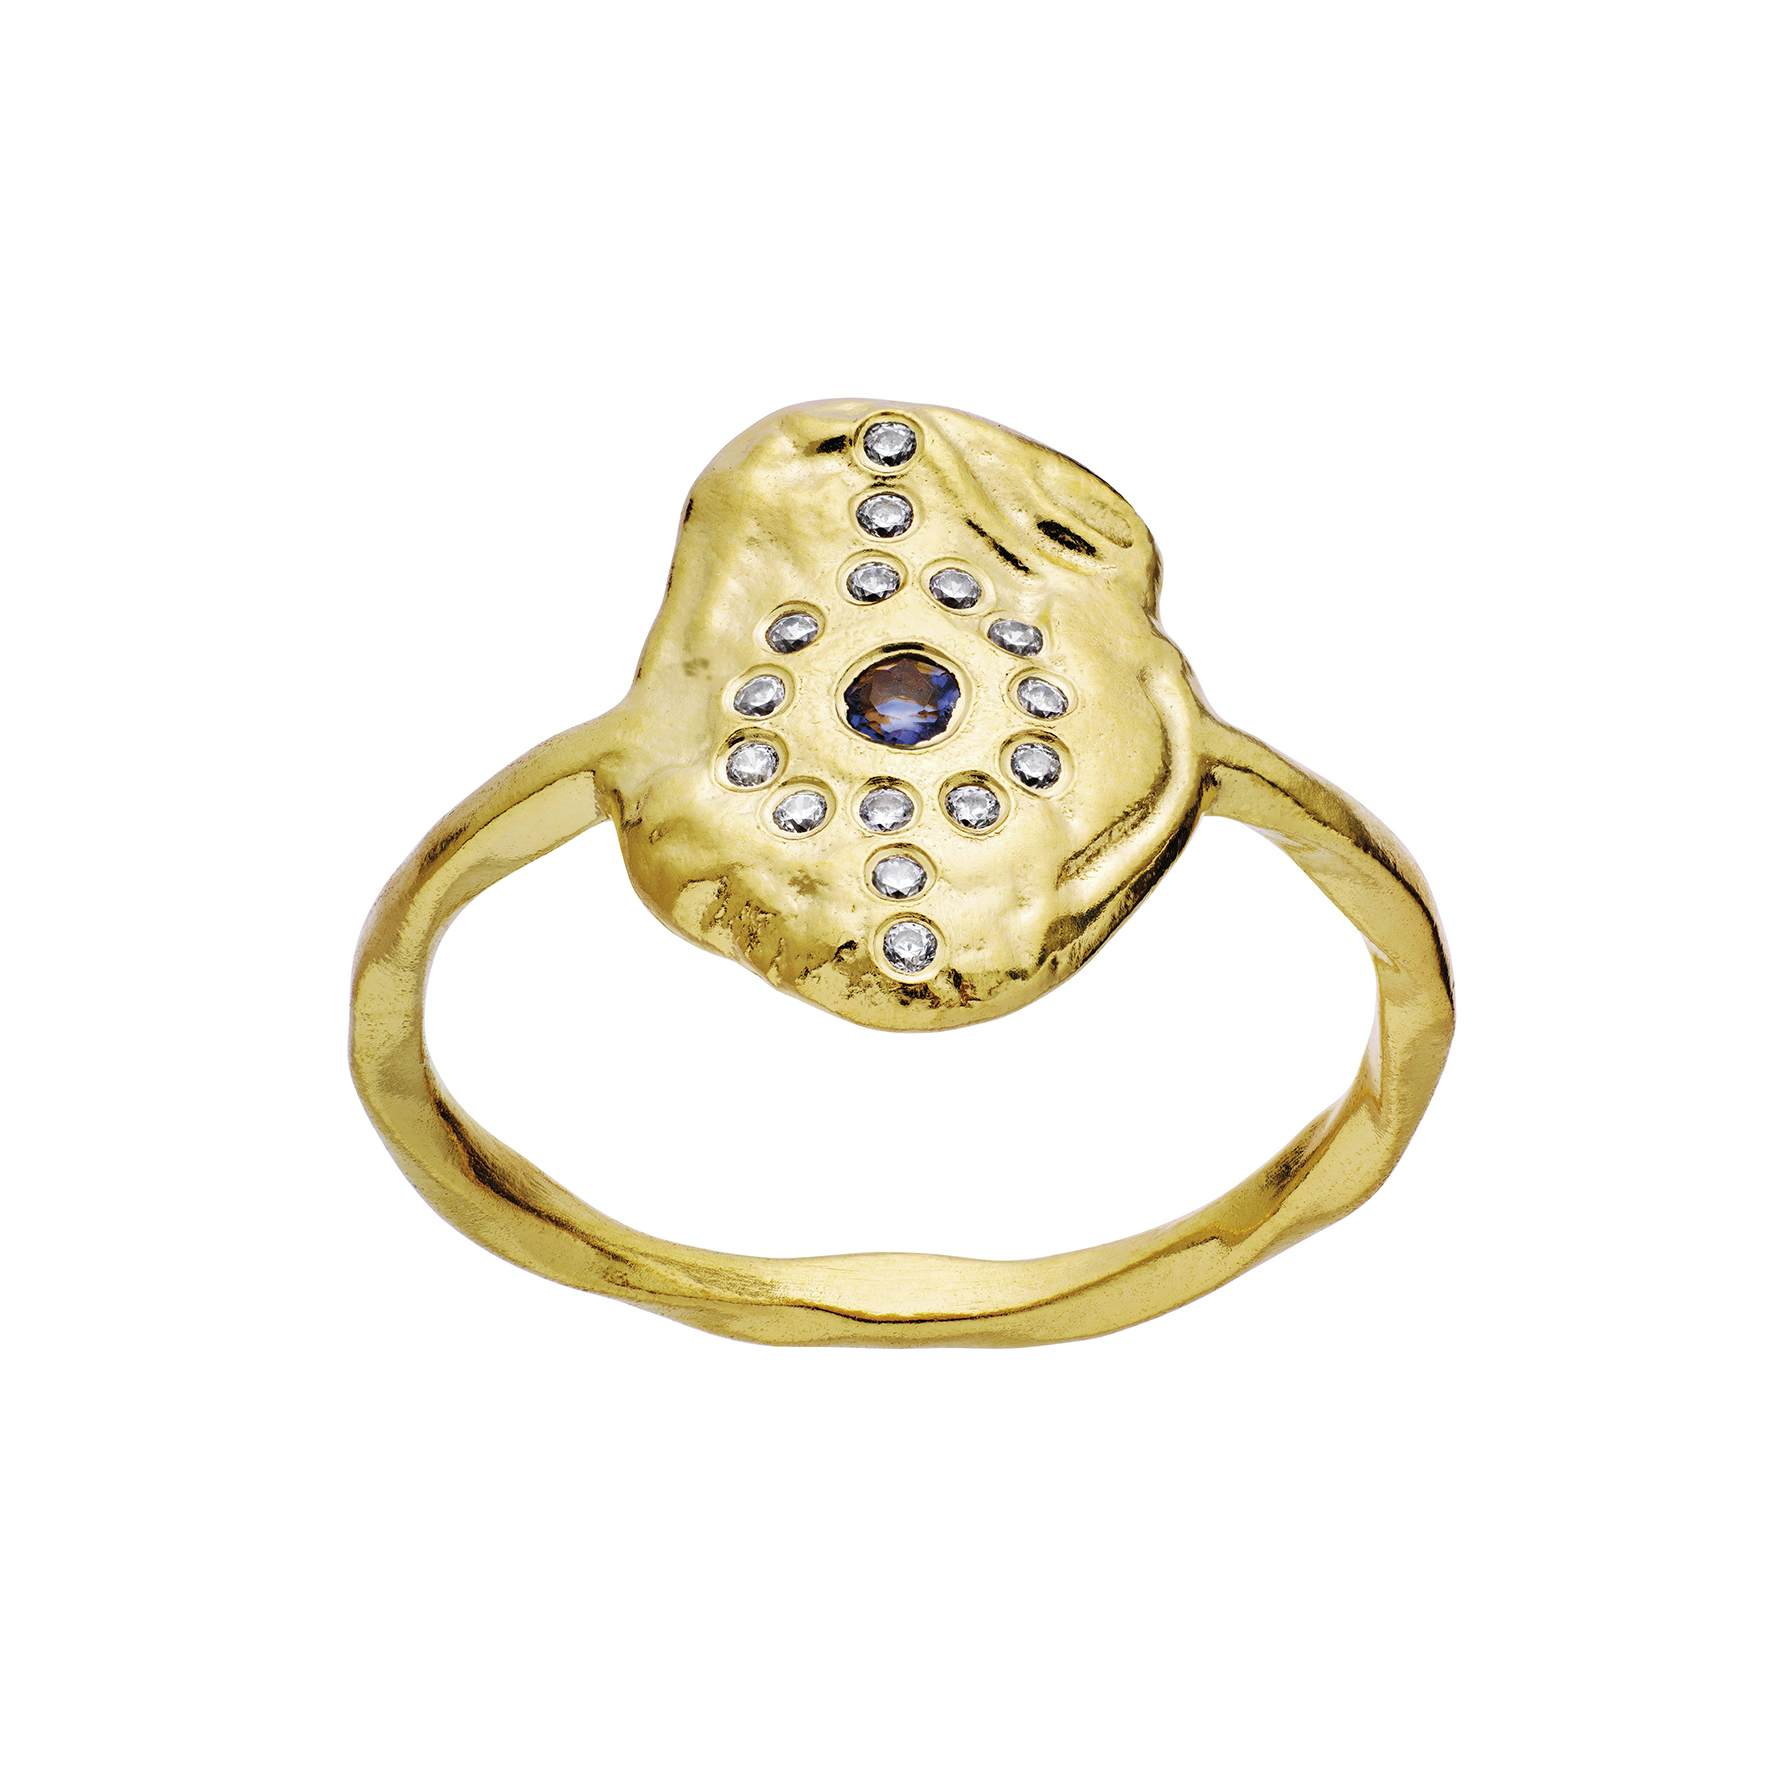 Enya Ring from Maanesten in Goldplated-Silver Sterling 925